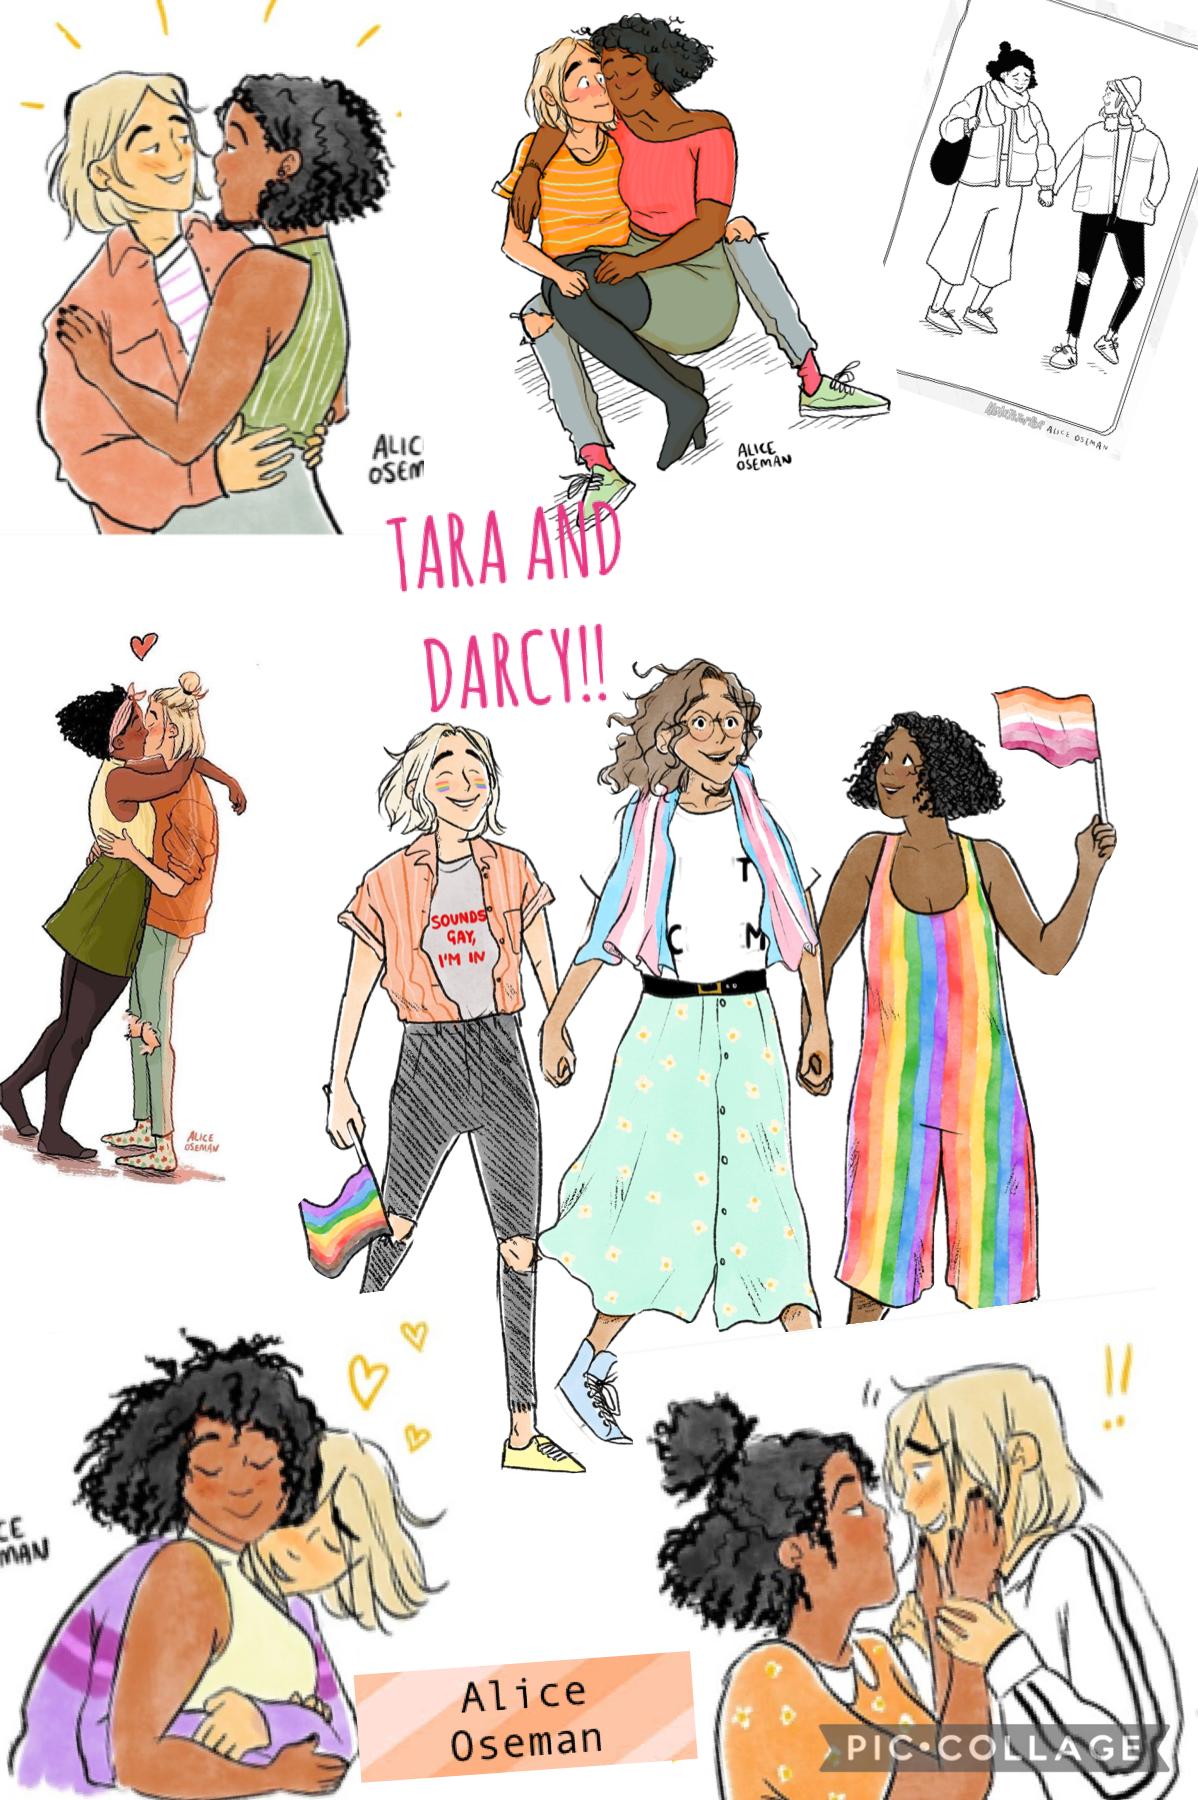 To all my dear heartstopper fans this is a Tara and Darcy edition. Comment a character to focus on next!